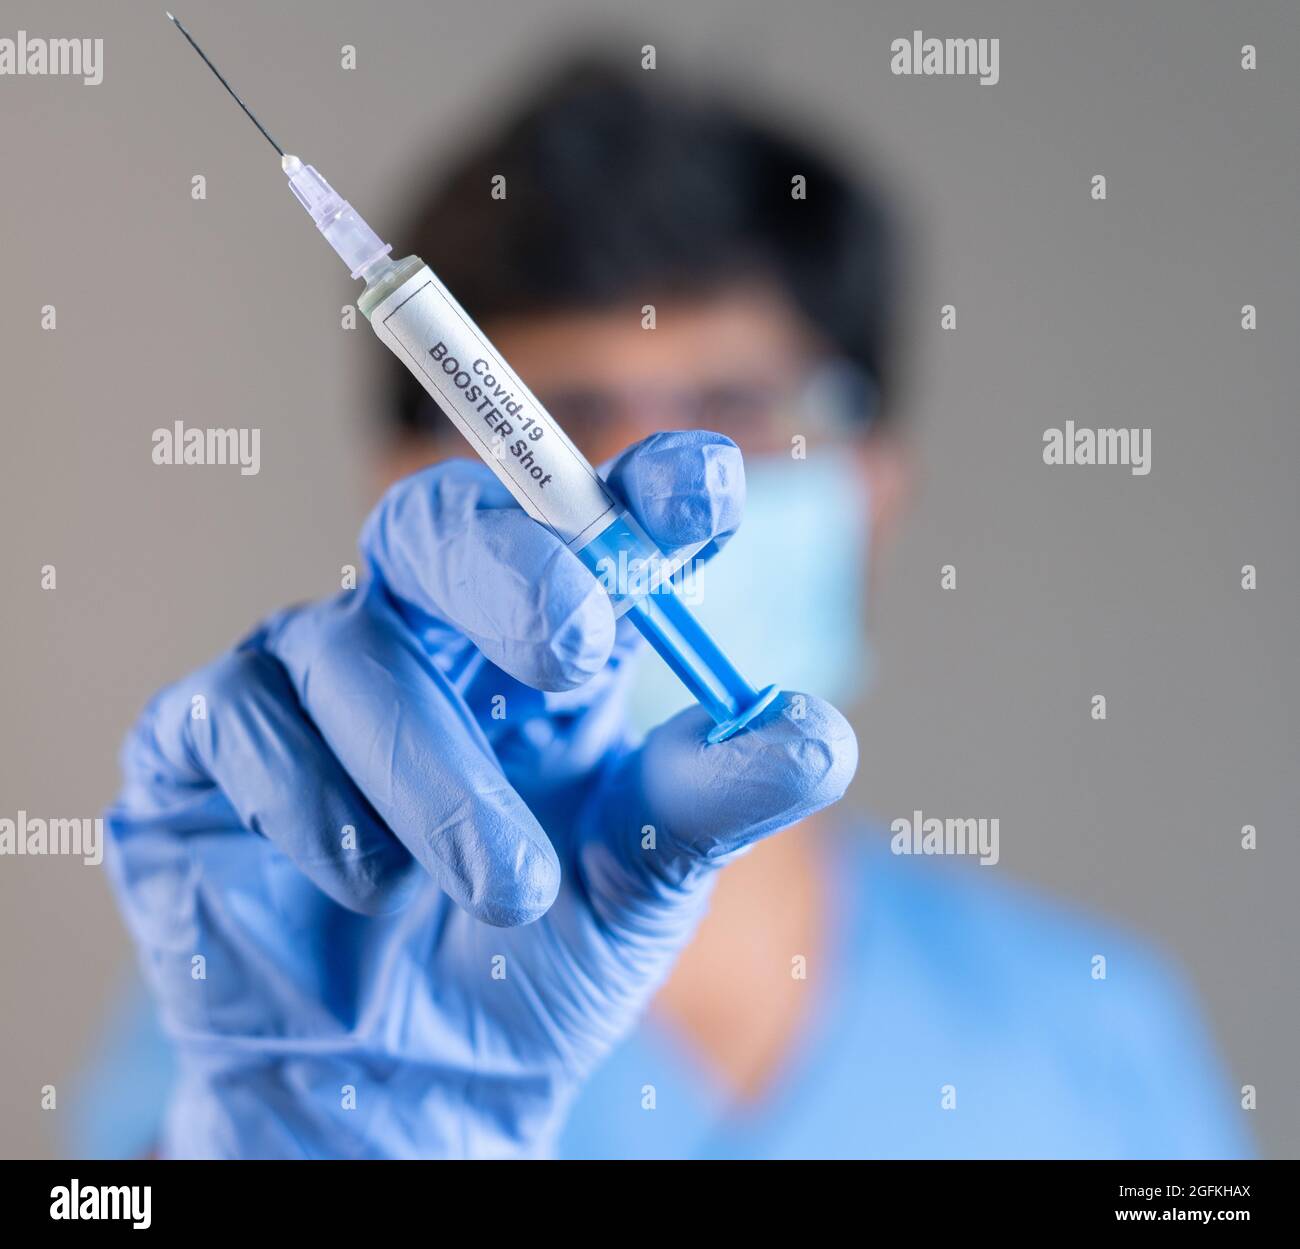 Focus on syringe, close up of doctor or nurse hands holding covid vaccination booster shot or 3rd dose syringe. Stock Photo